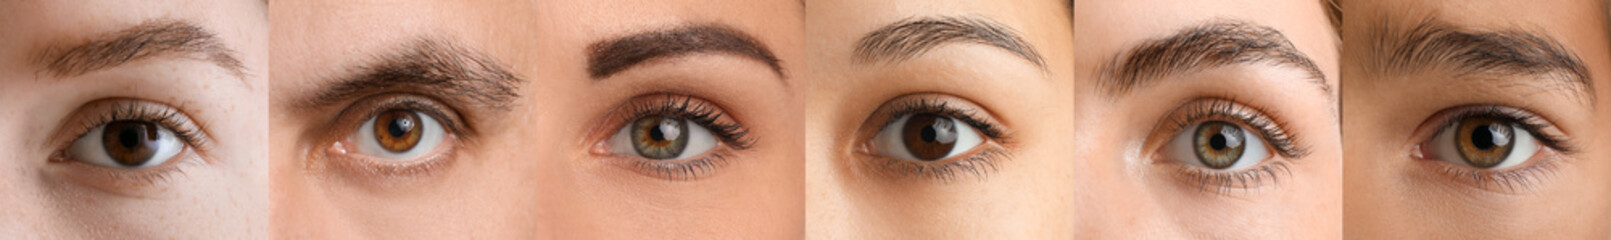 Collage with brown eyes of different people, closeup